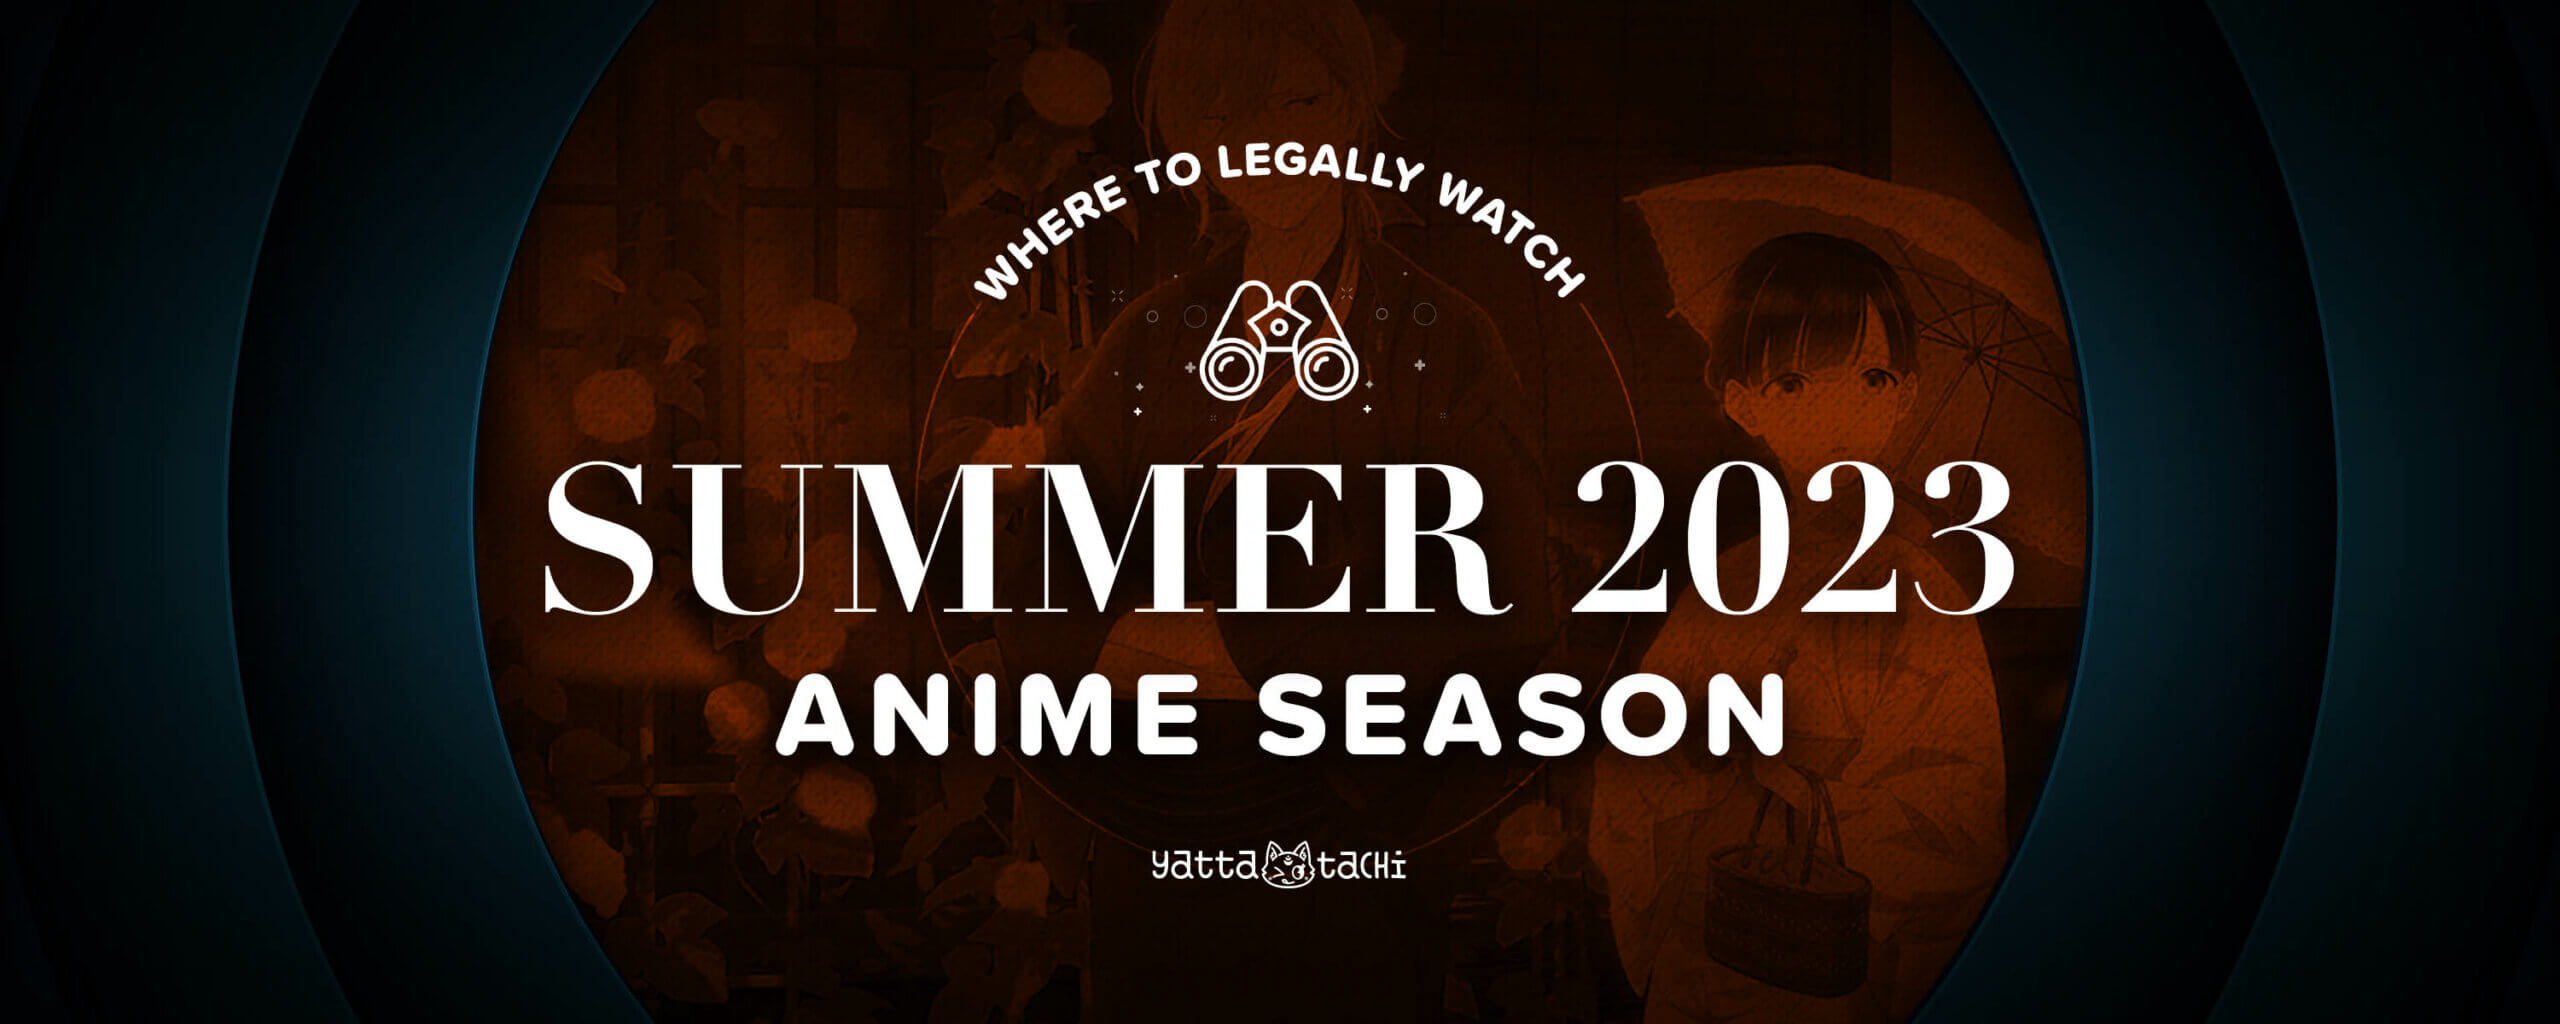 How to watch and stream Level 1 Demon Lord and One Room Hero - 2023-2023 on  Roku